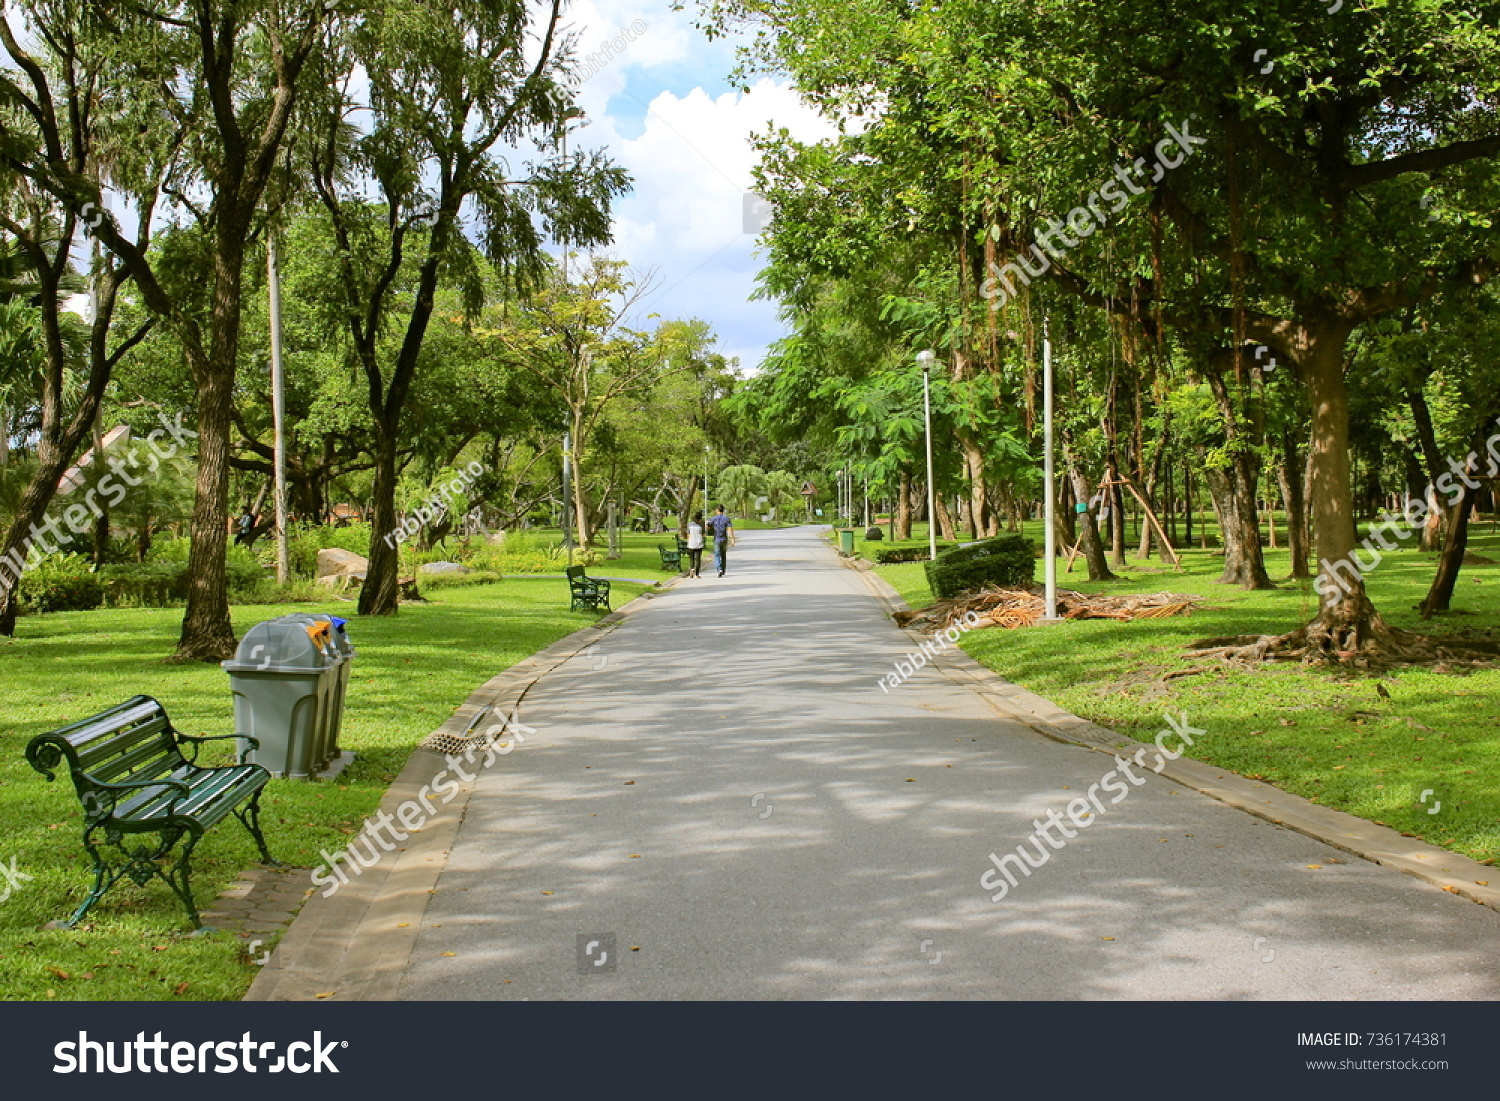  The power of light and shadow,Nature background in the garden,The perfect combination of nature,Tree nature background,Holidays in Bangkok public park #736174381